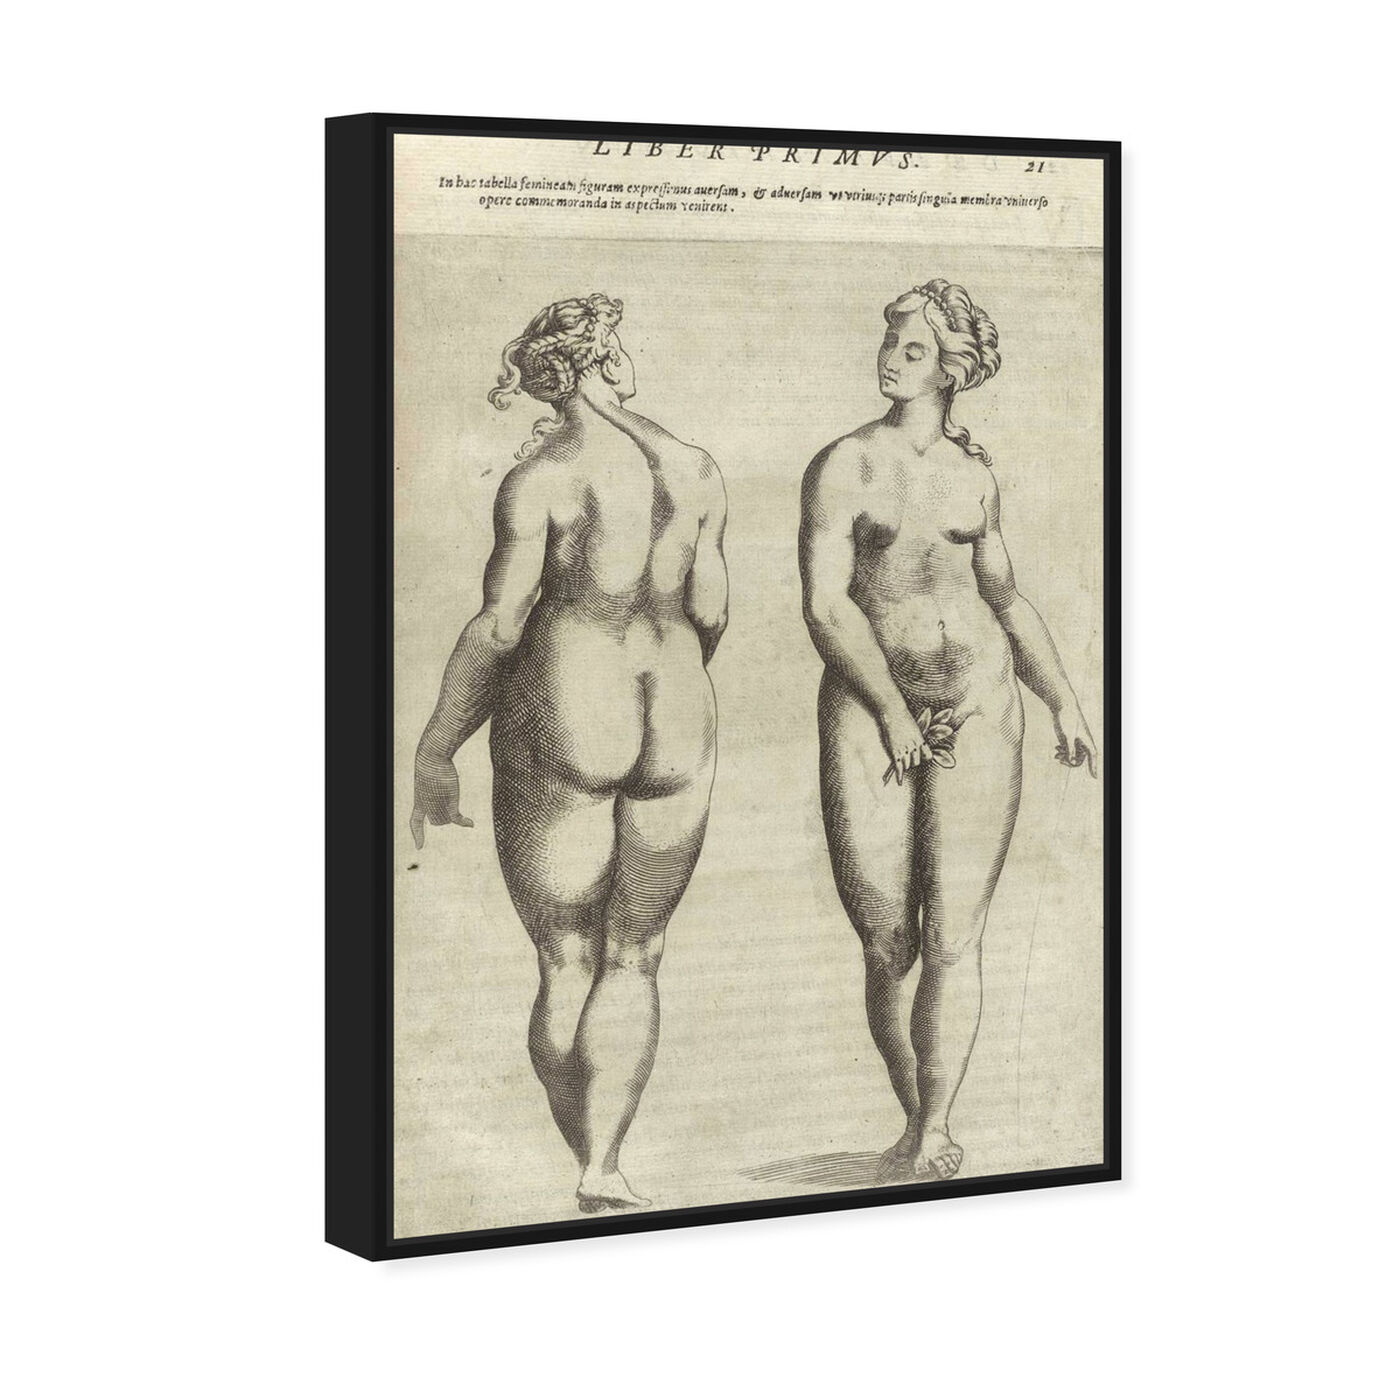 Angled view of Liber Primvs - The Art Cabinet featuring classic and figurative and nudes art.